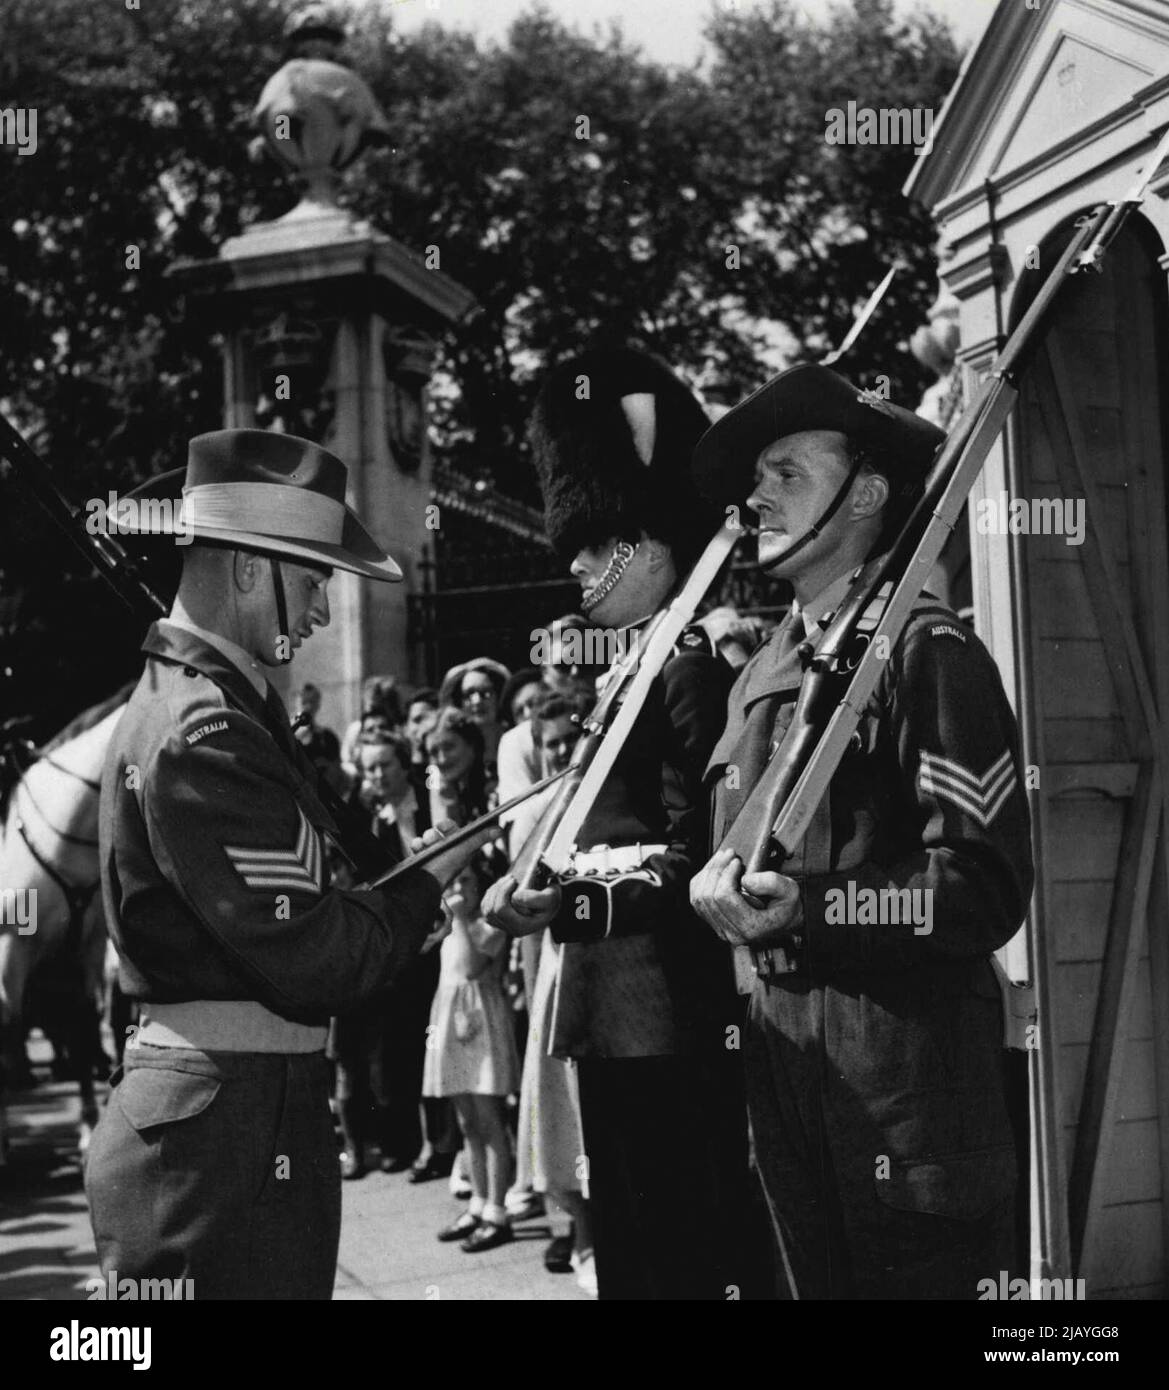 The Australian sergeant reading the take-over orders to an Australian sentry. Changing Guards at Buckingham Palace - but with a difference. The Australian Coronation contingent marched into Buckingham Palace today and took over guard duty from the Grendadiers. May 26, 1953. (Photo by Daily Mirror). Stock Photo